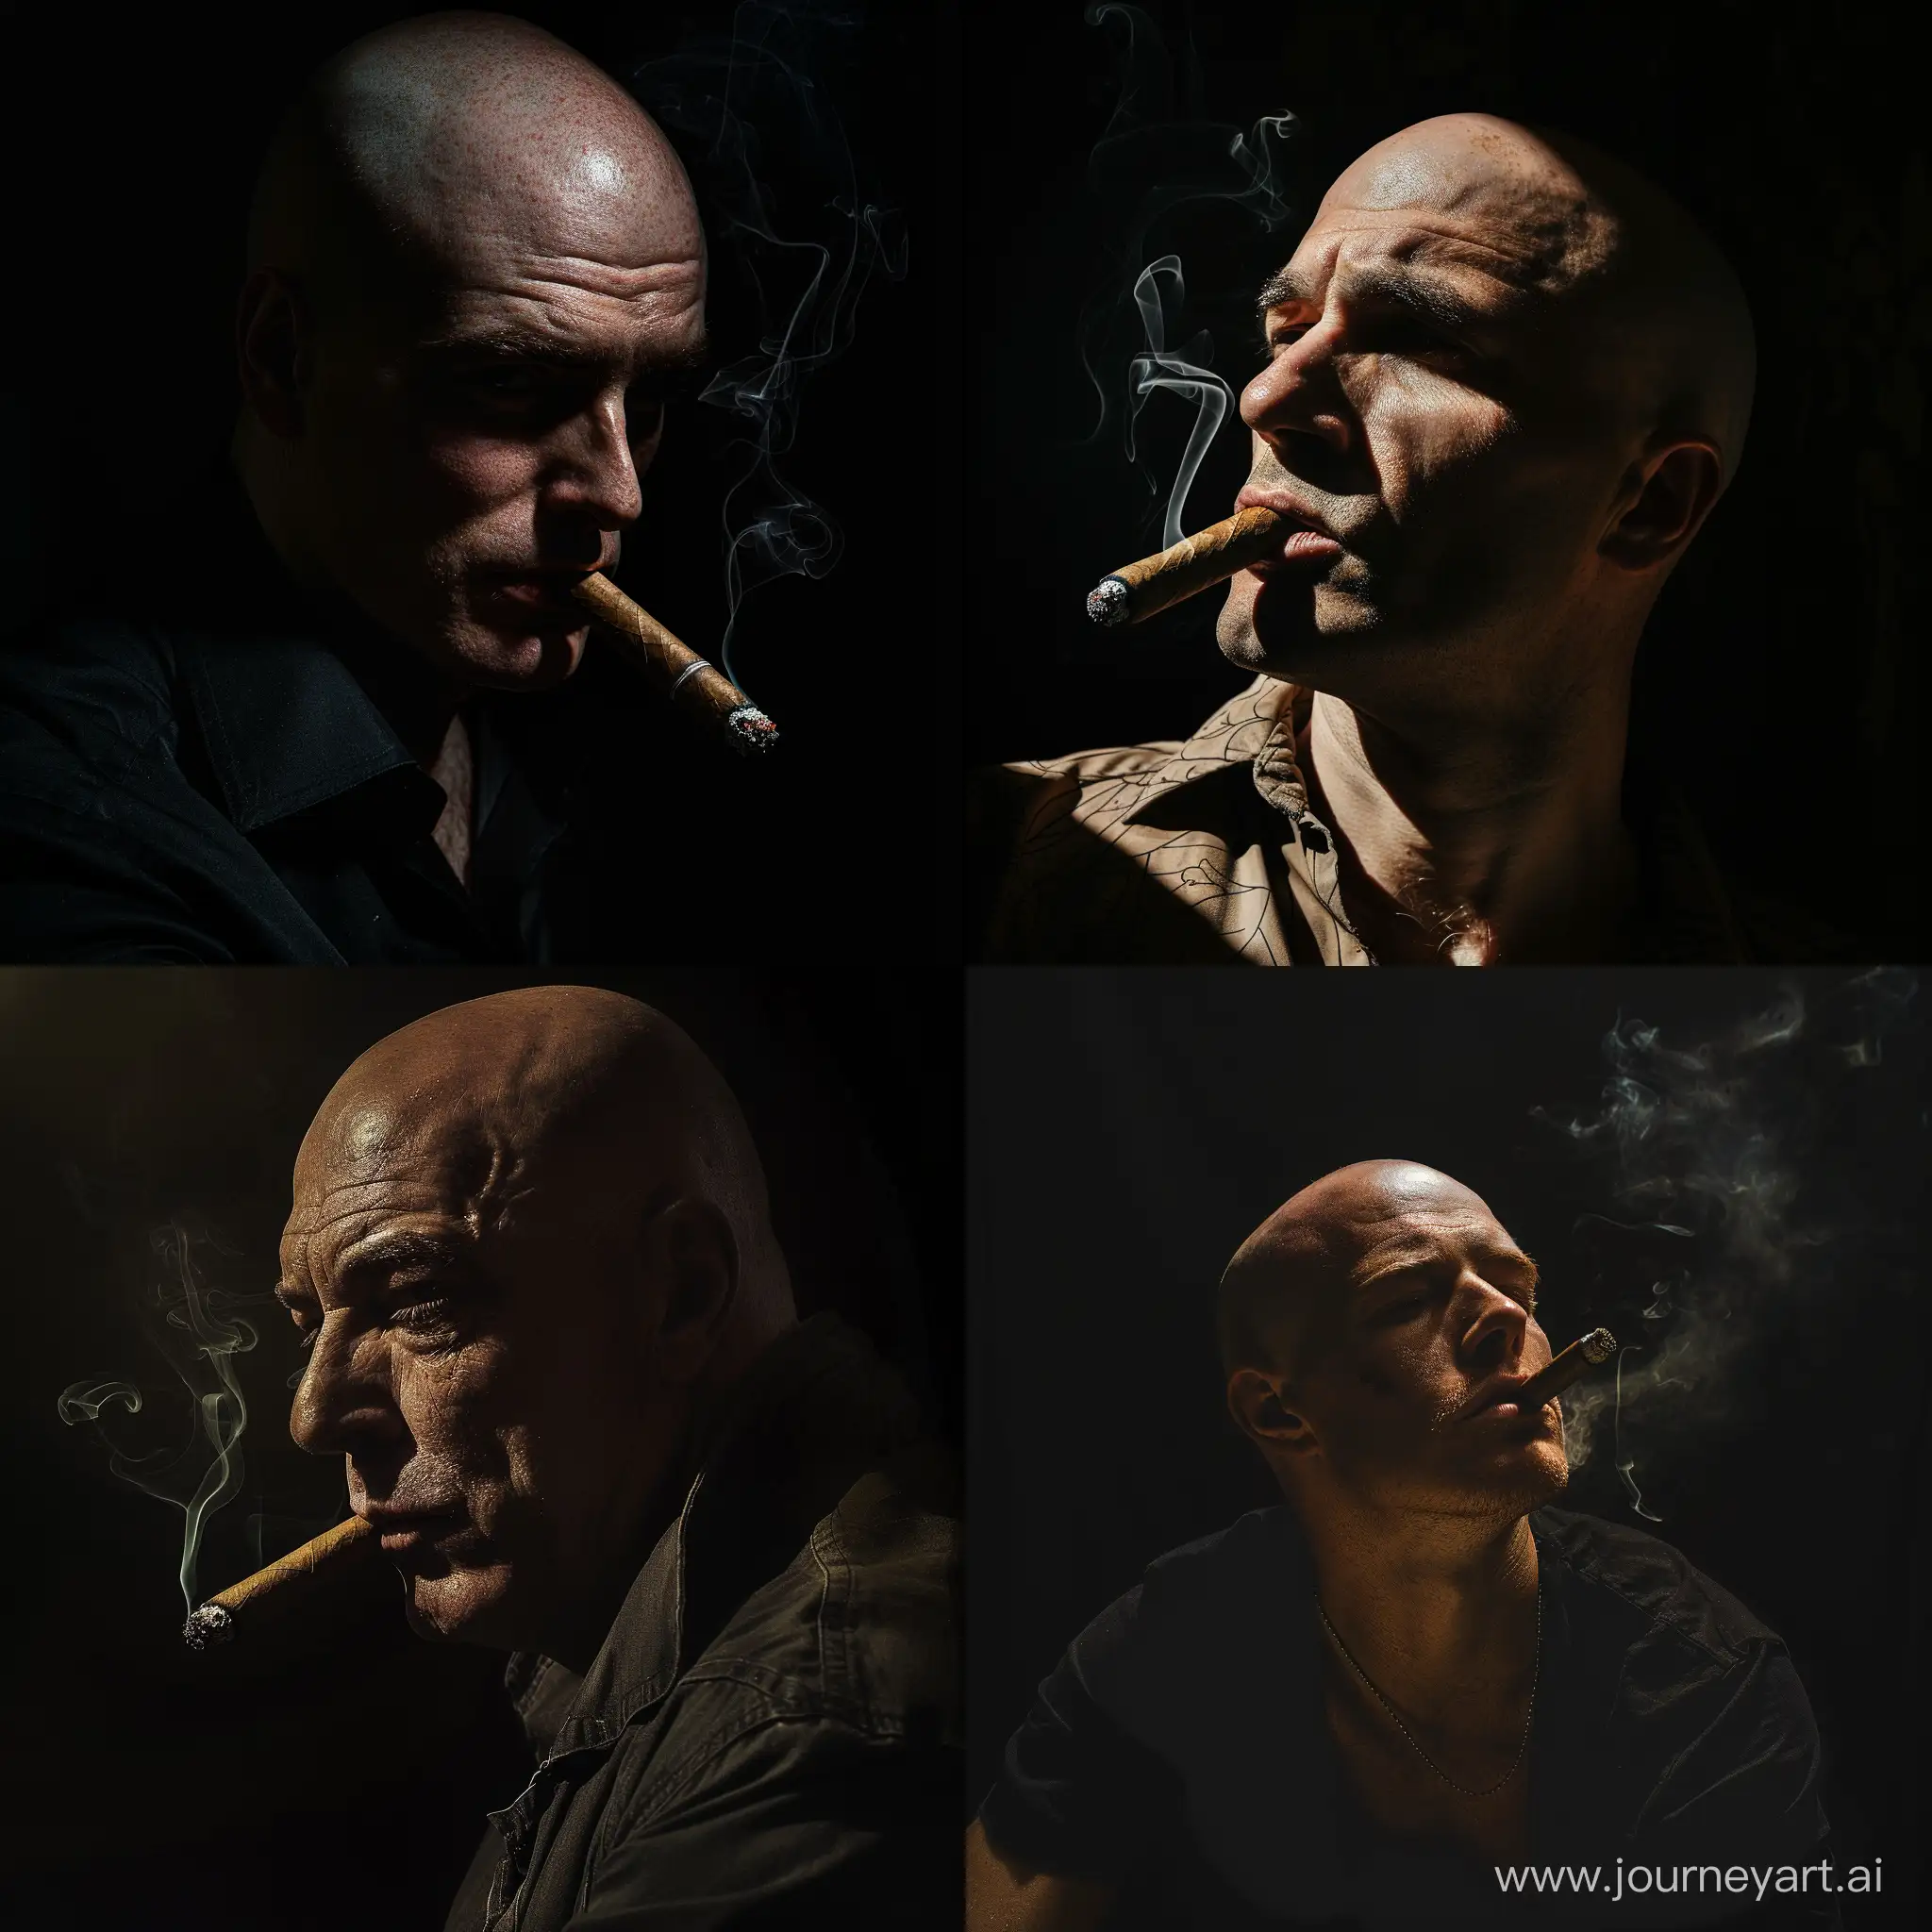 Mysterious-Bald-Man-Immersed-in-Shadows-Smoking-a-Cigar